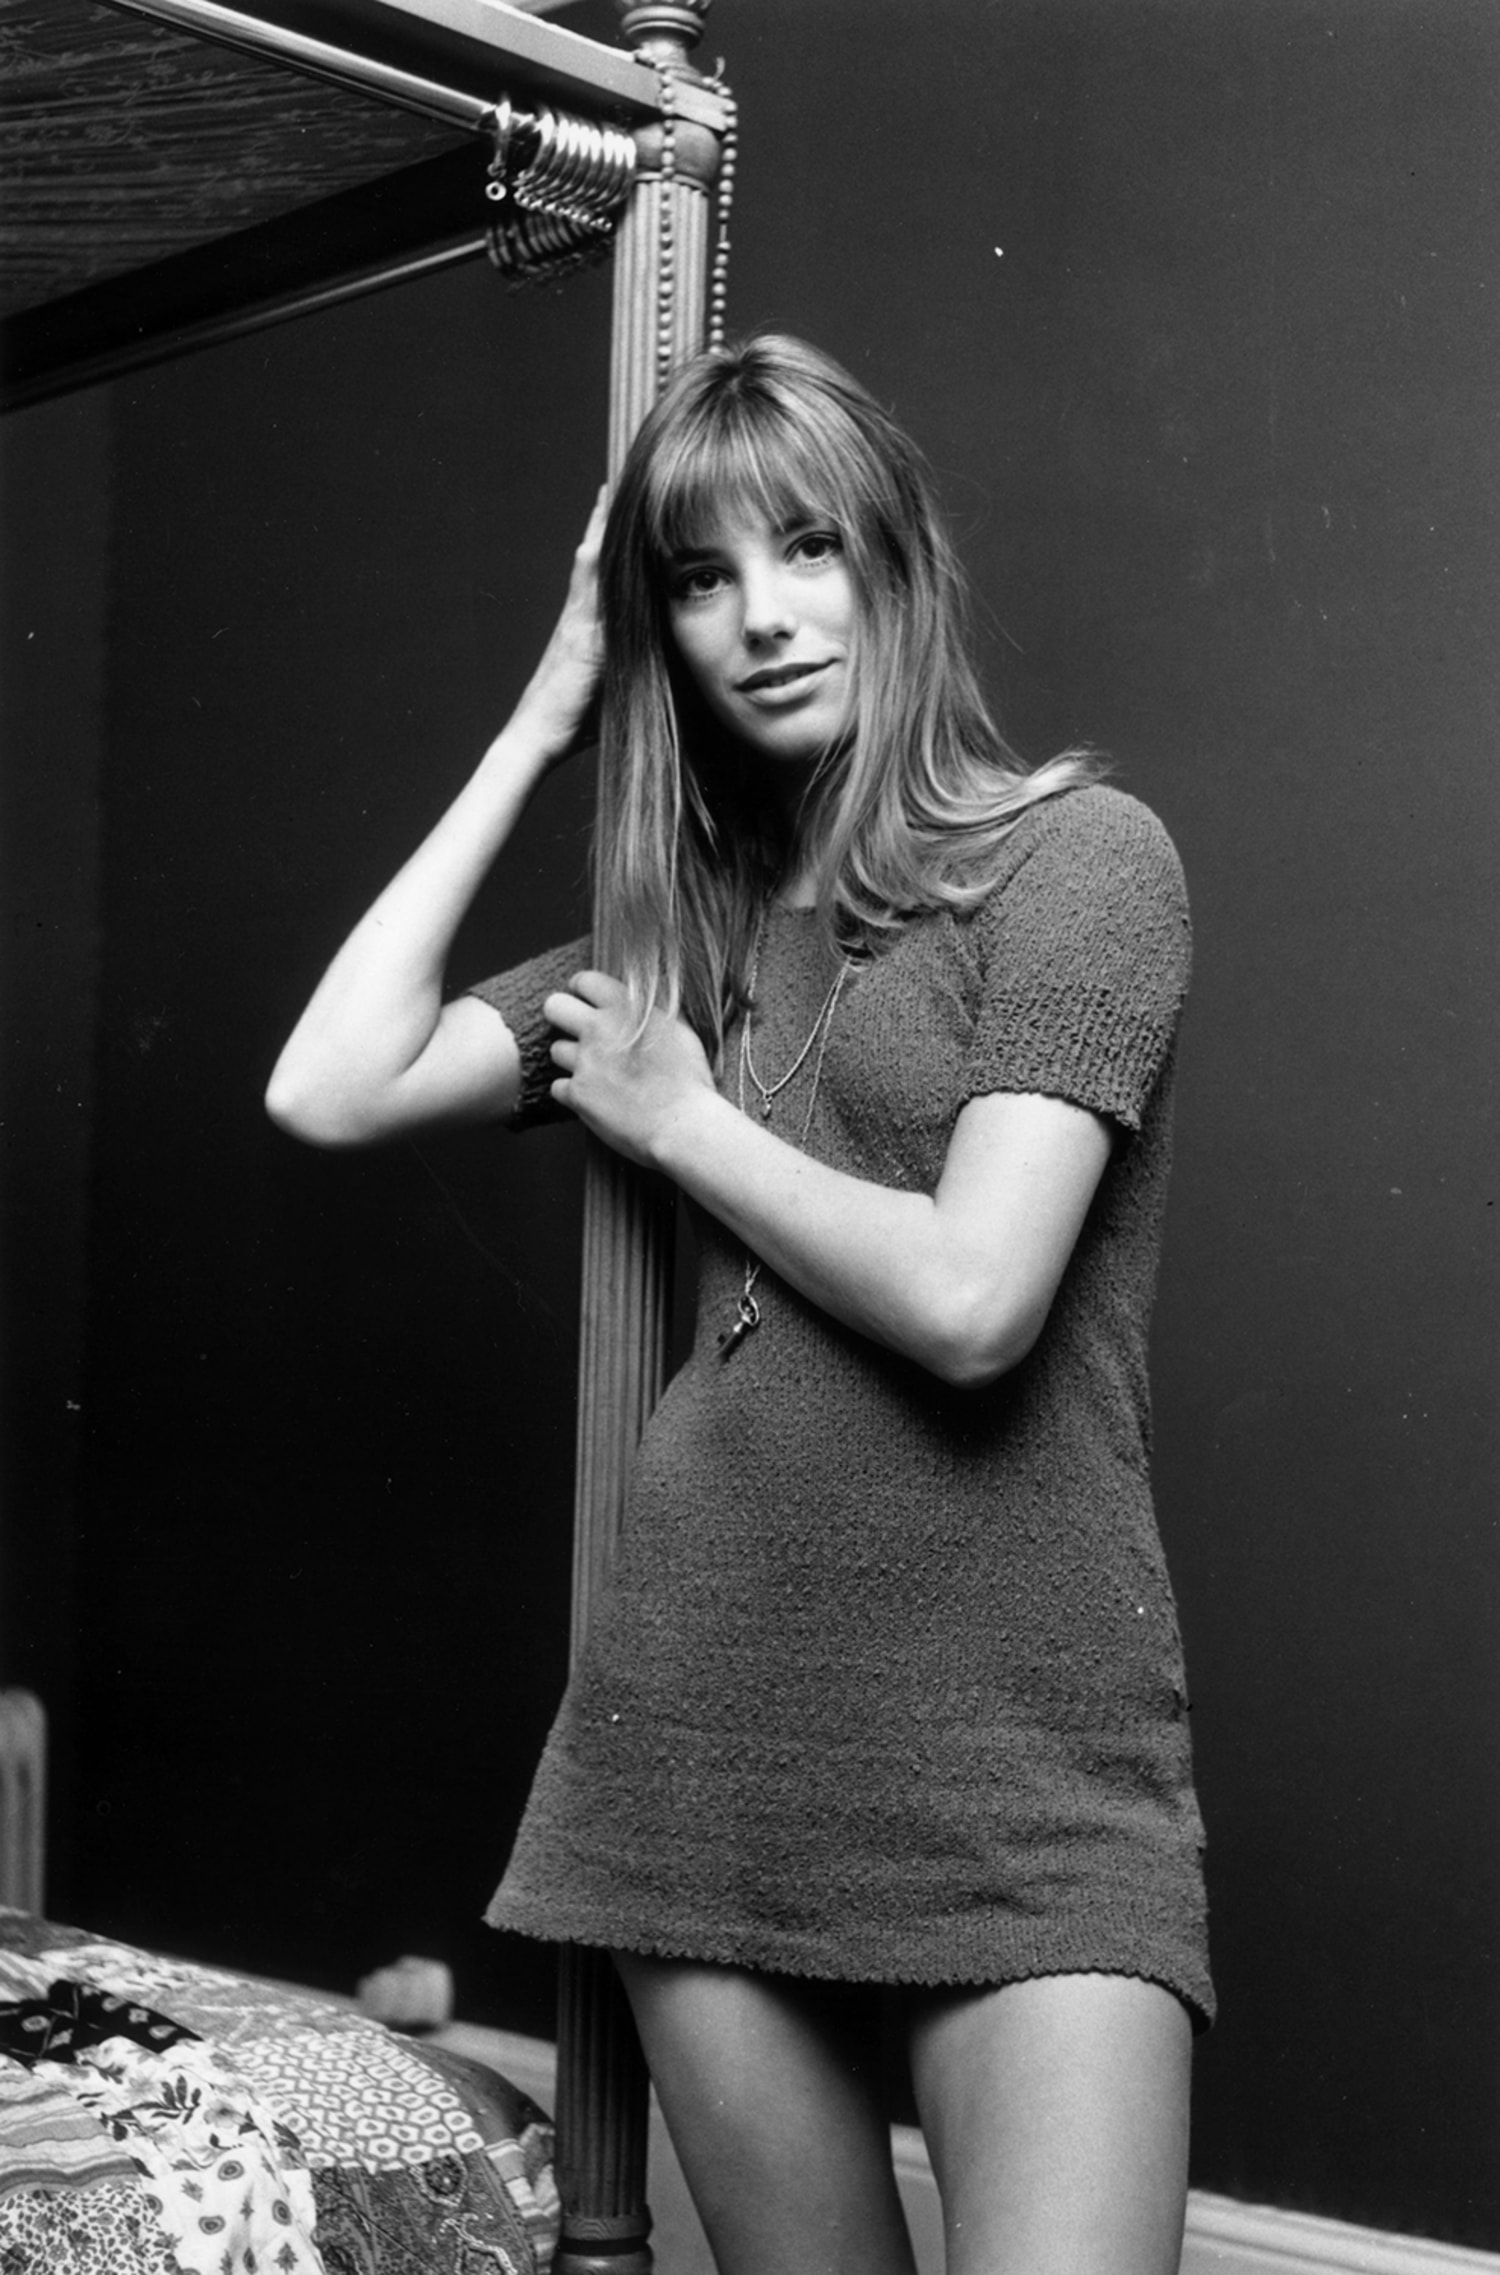 We look back at 27 times Jane Birkin inspired our wardrobes